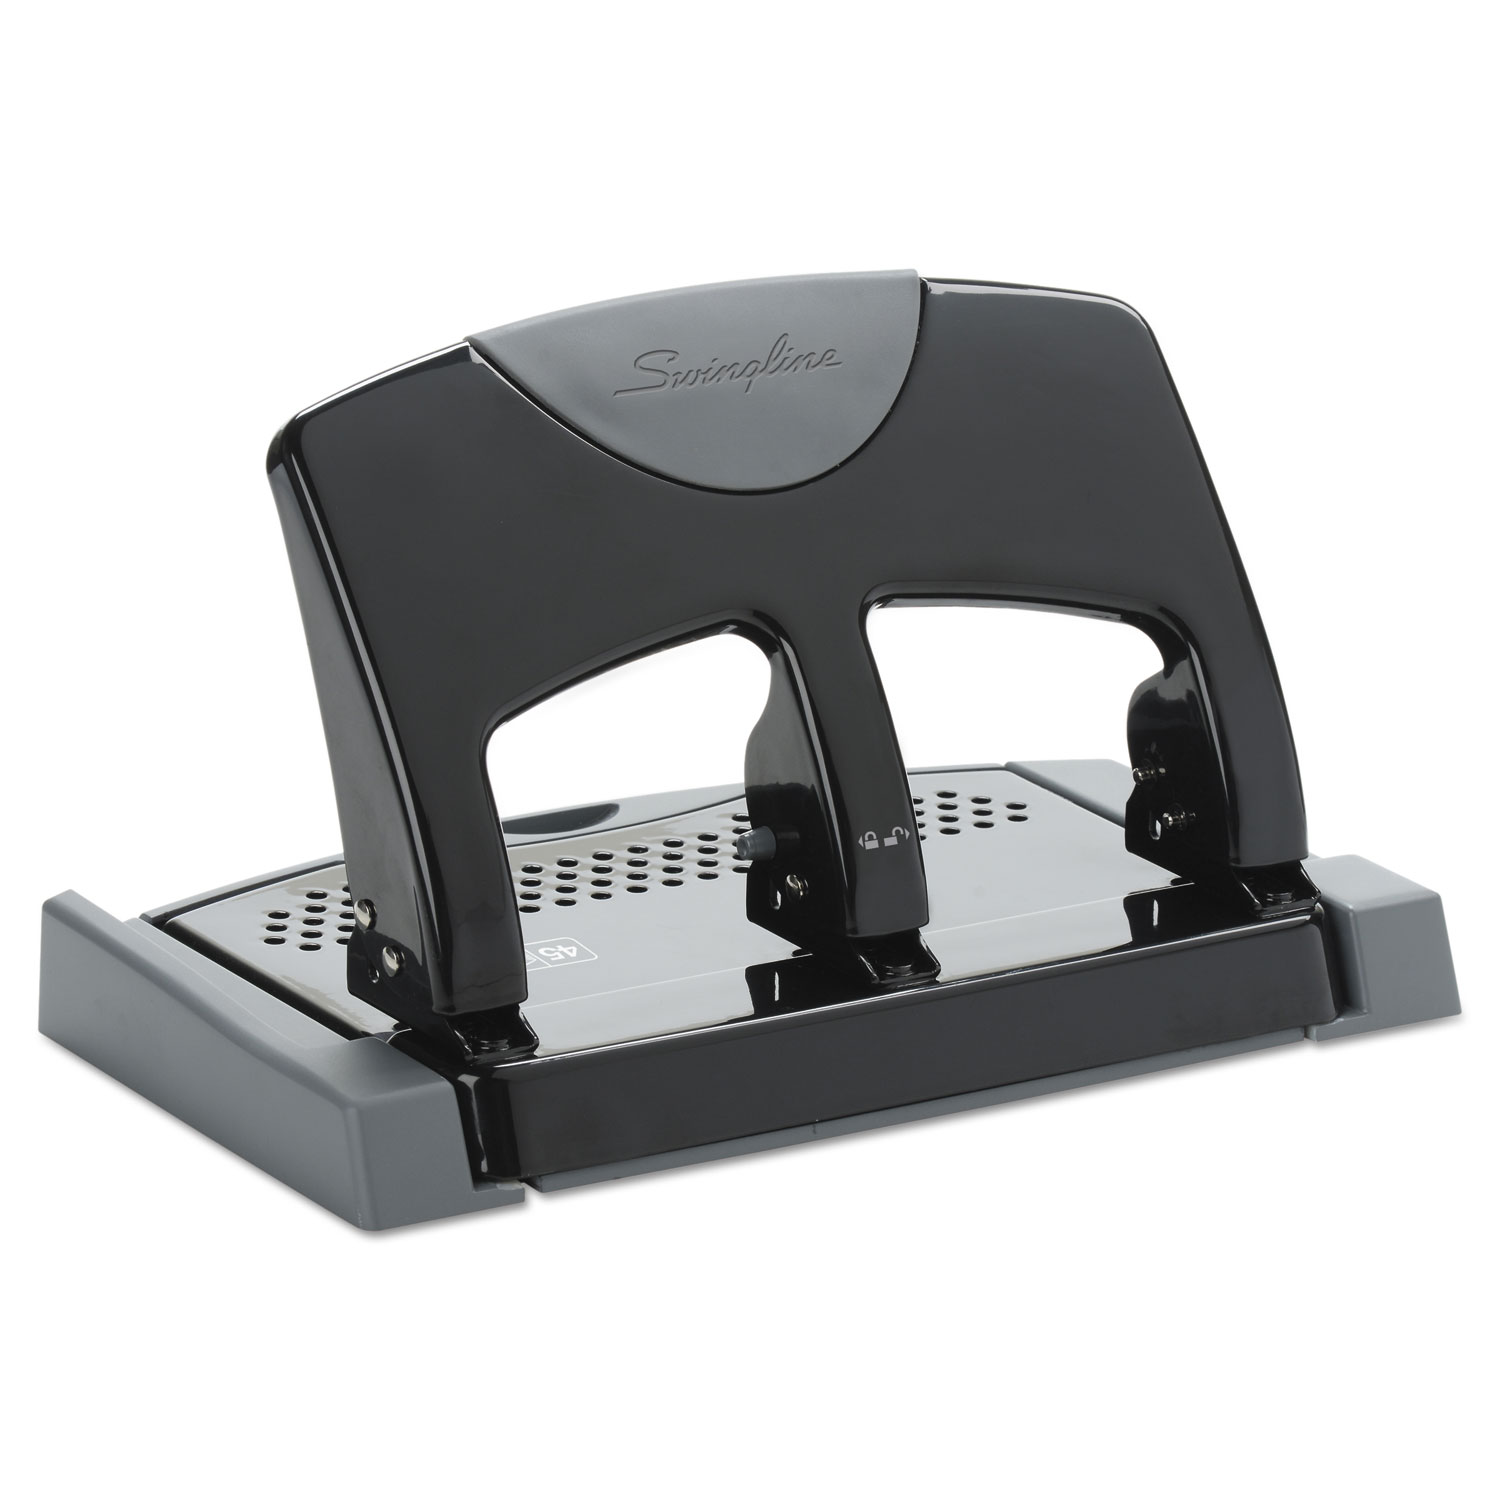 Swingline 20-Sheet SmartTouch Two-Hole Punch, 9/32 Holes, Black/Gray